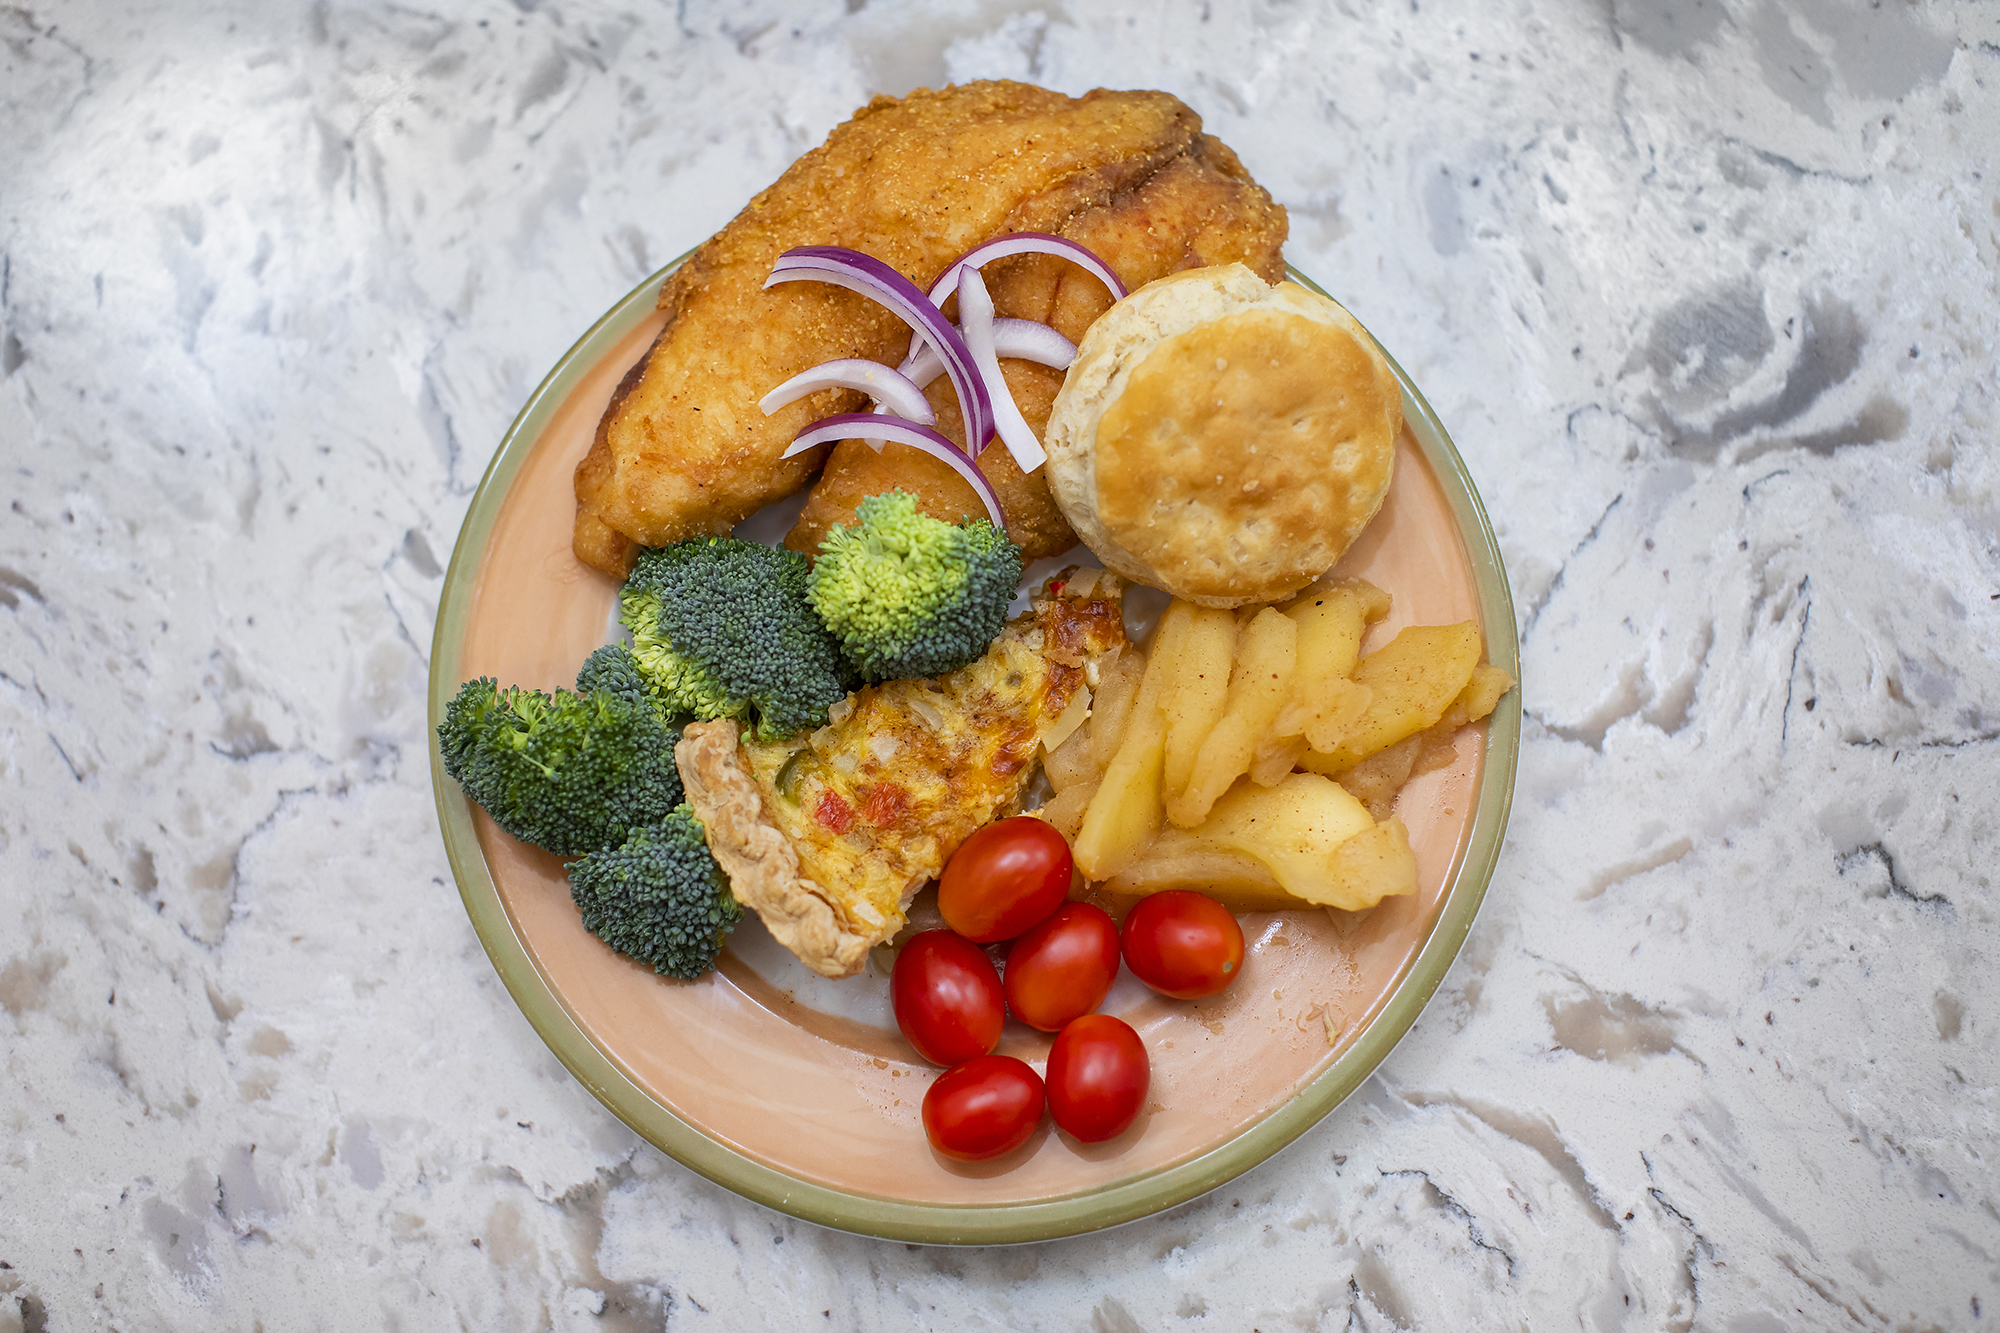 Plate of food which includes fried fish, crab pie, butter biscuit and roasted apples.